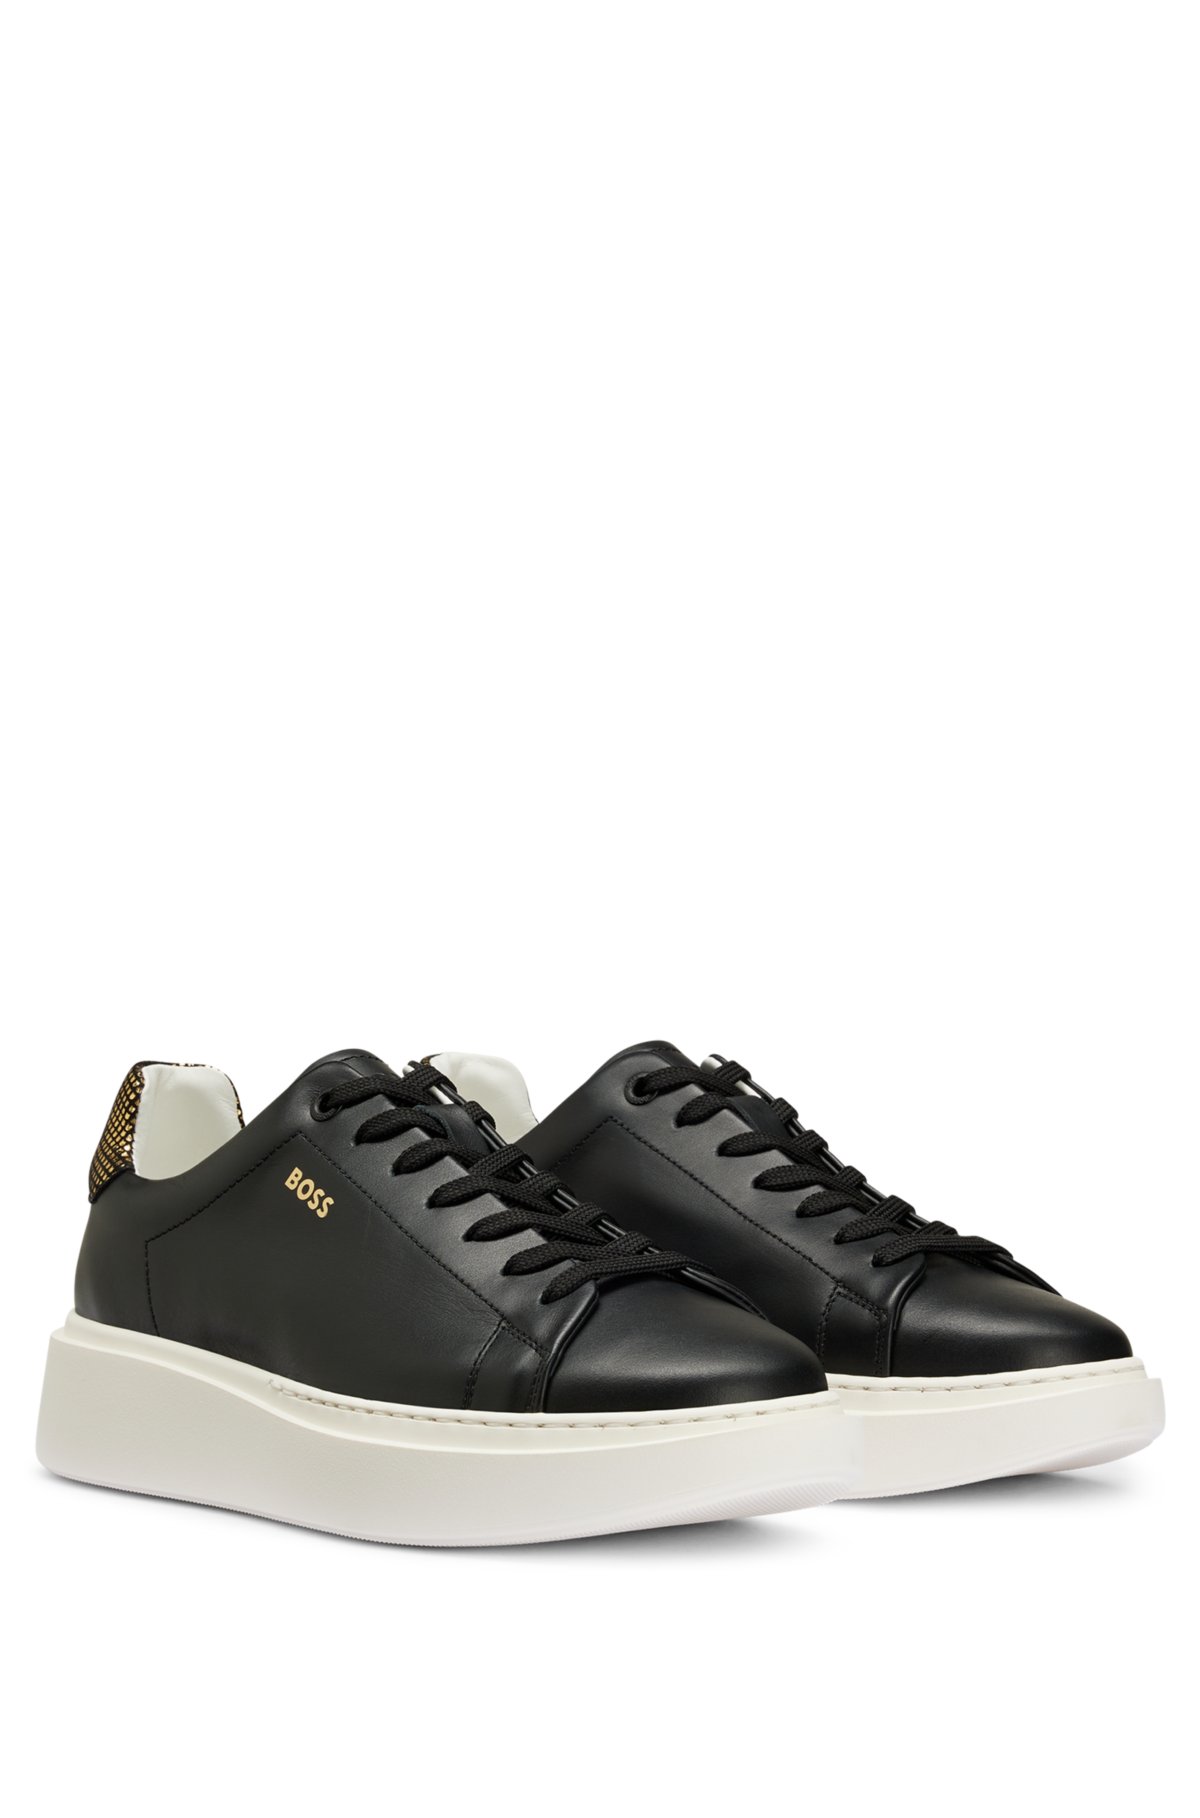 - Italian-leather lace-up trainers with